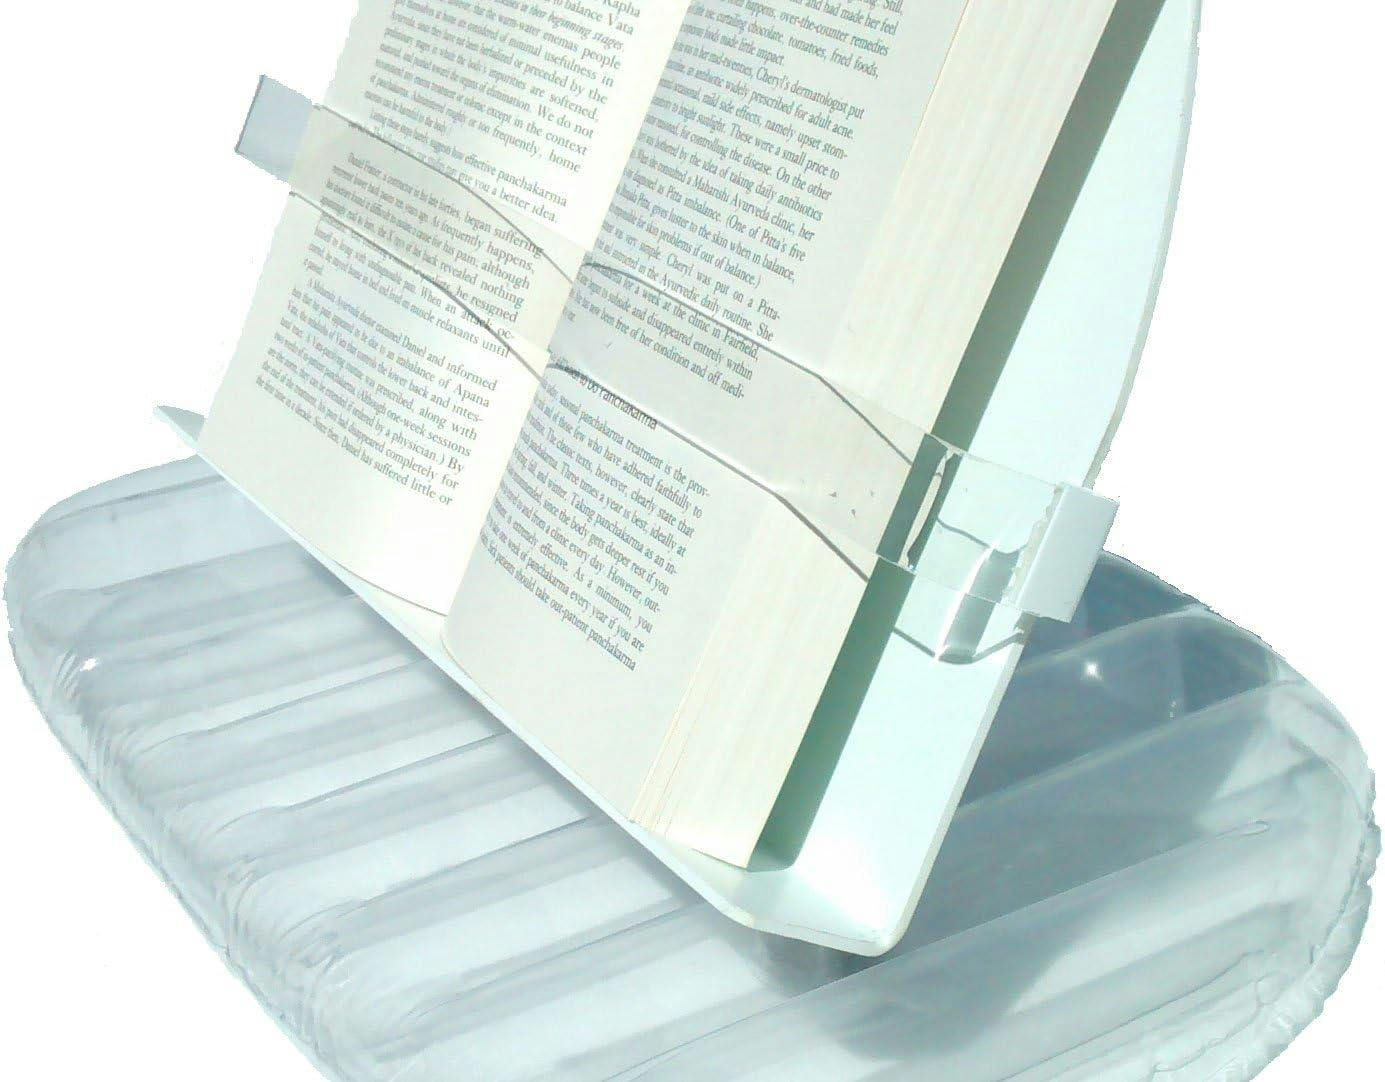 Buoyant Clear Acrylic Floating Book/Tablet Caddy for Bath and Pool